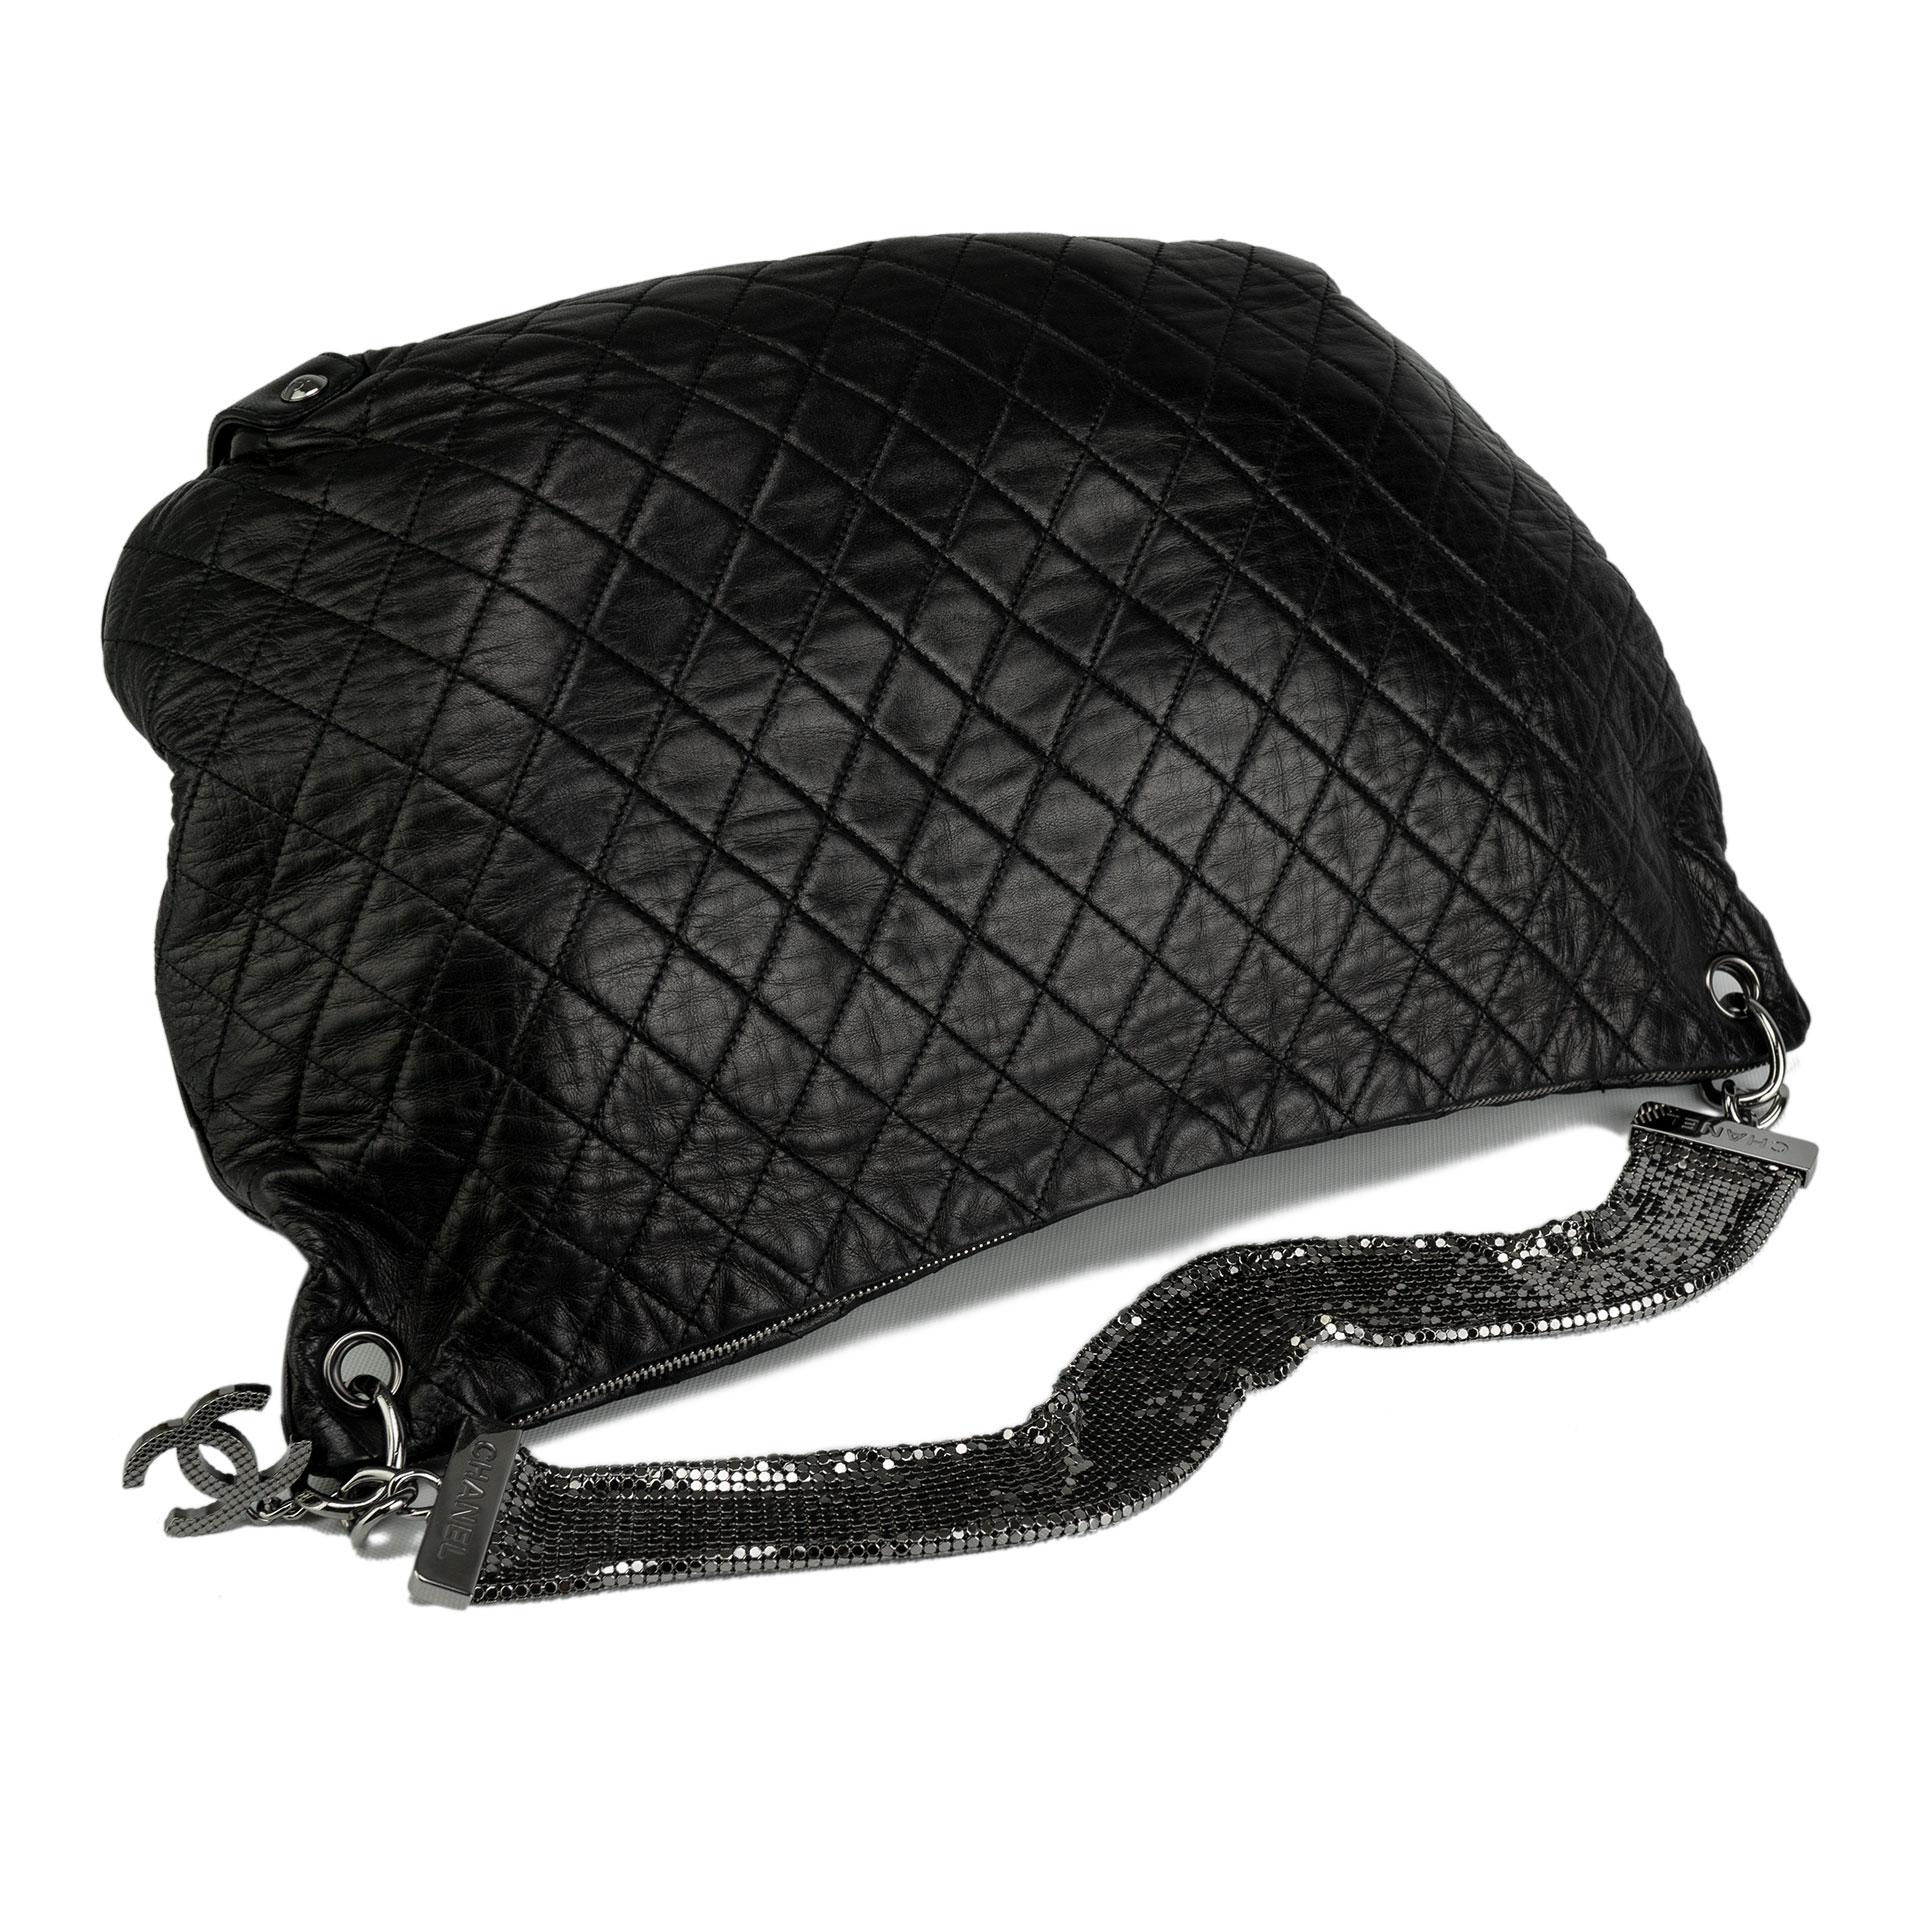 Chanel 2008 Metallic Mesh Soft Quilted Black Lambskin Leather Large Hobo Bag For Sale 5